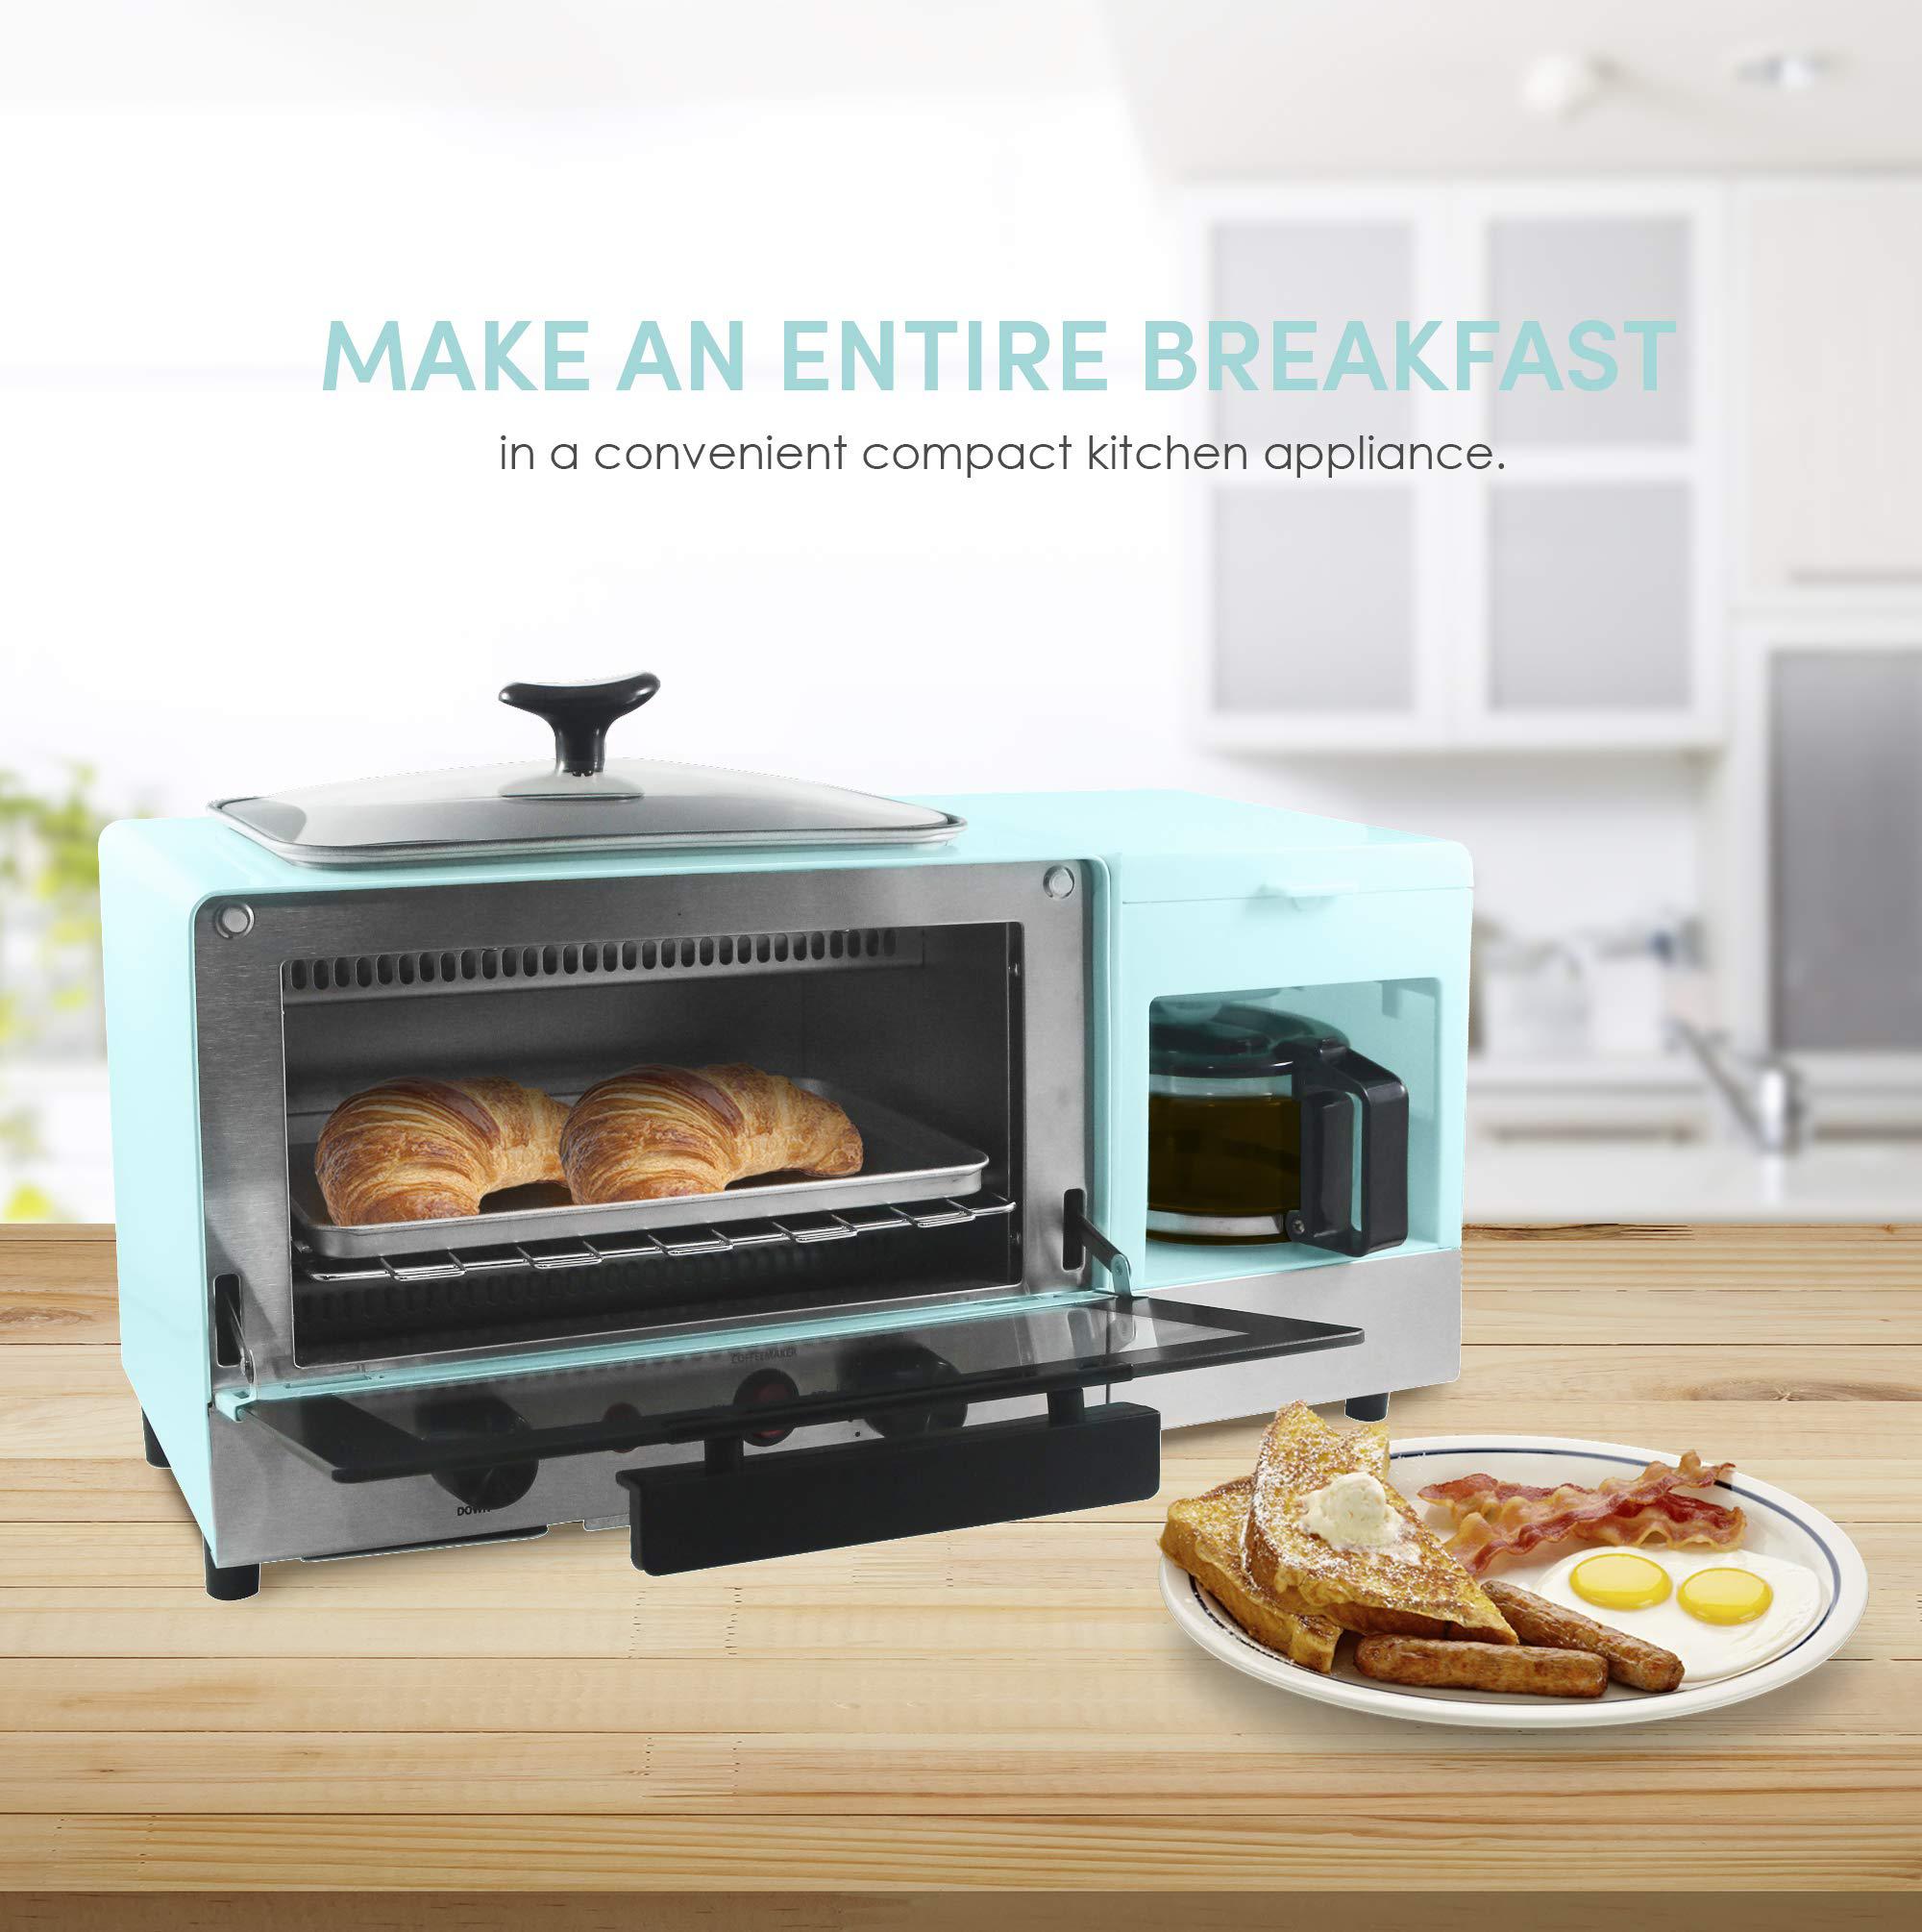 4-cup coffeemaker, 2 slice toaster oven with timer, griddle x-large, blue elite gourmet americana 2 slice, 9.5" griddle with glass lid, 3-in-1 breakfast center station, 4-cup coffeemaker, toaster ove